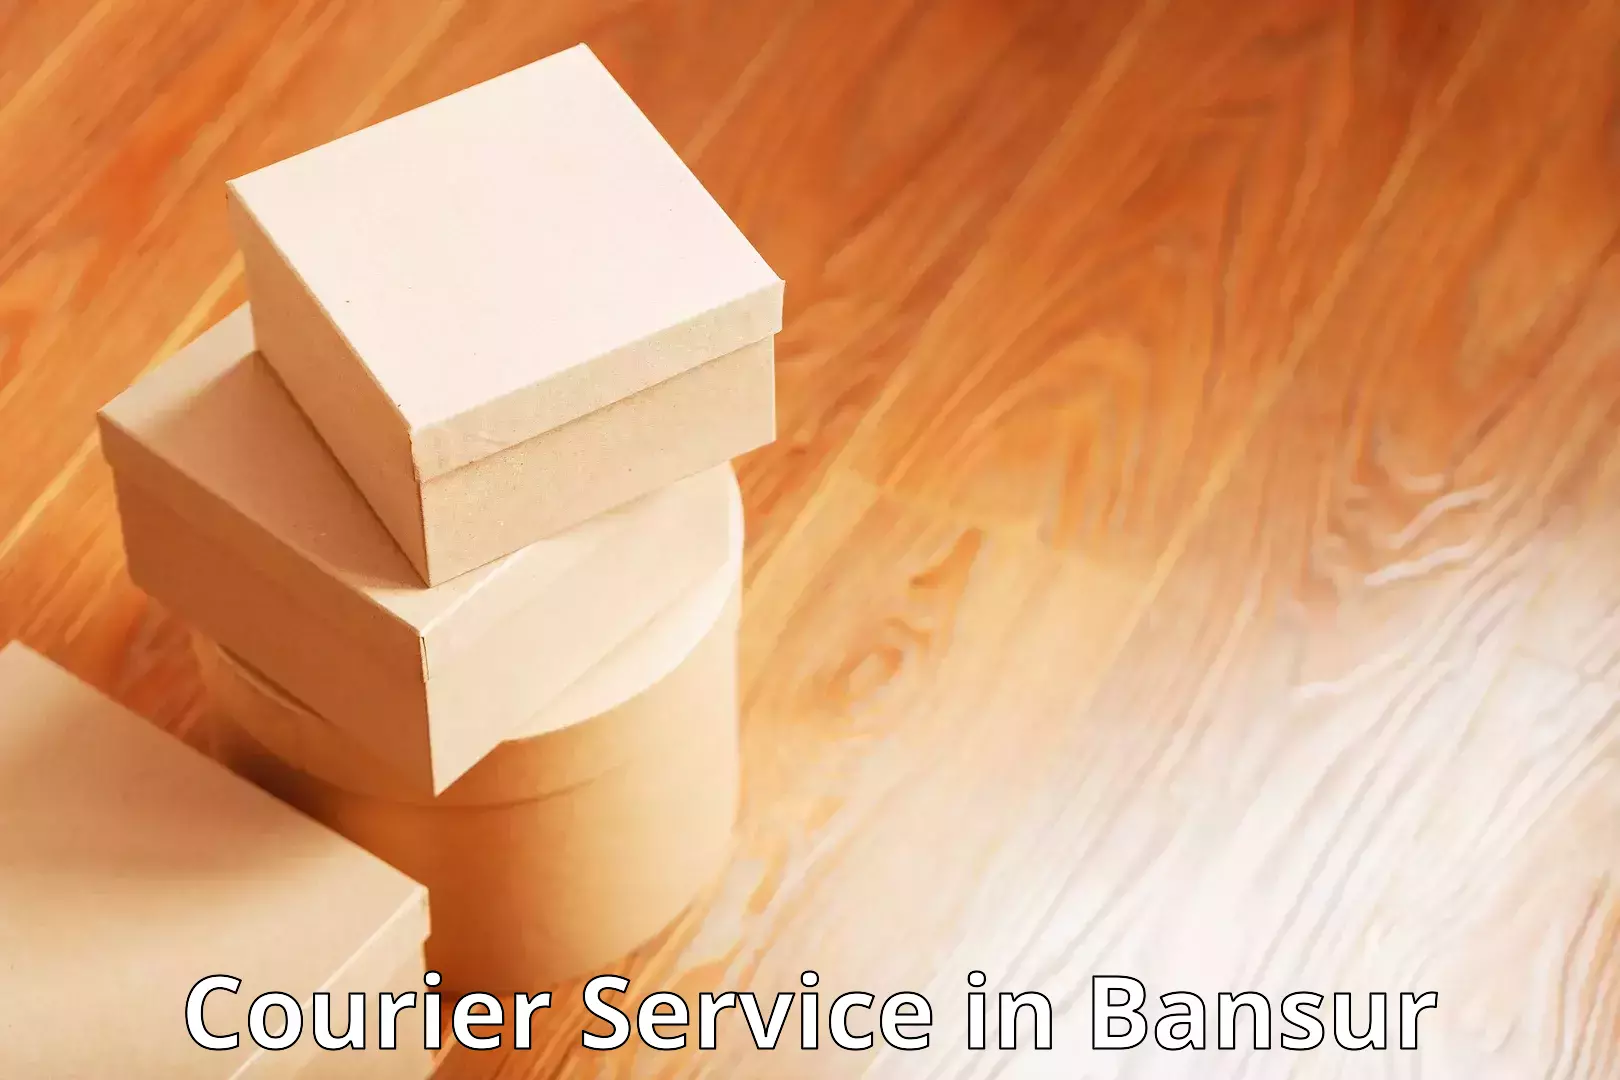 Modern delivery technologies in Bansur